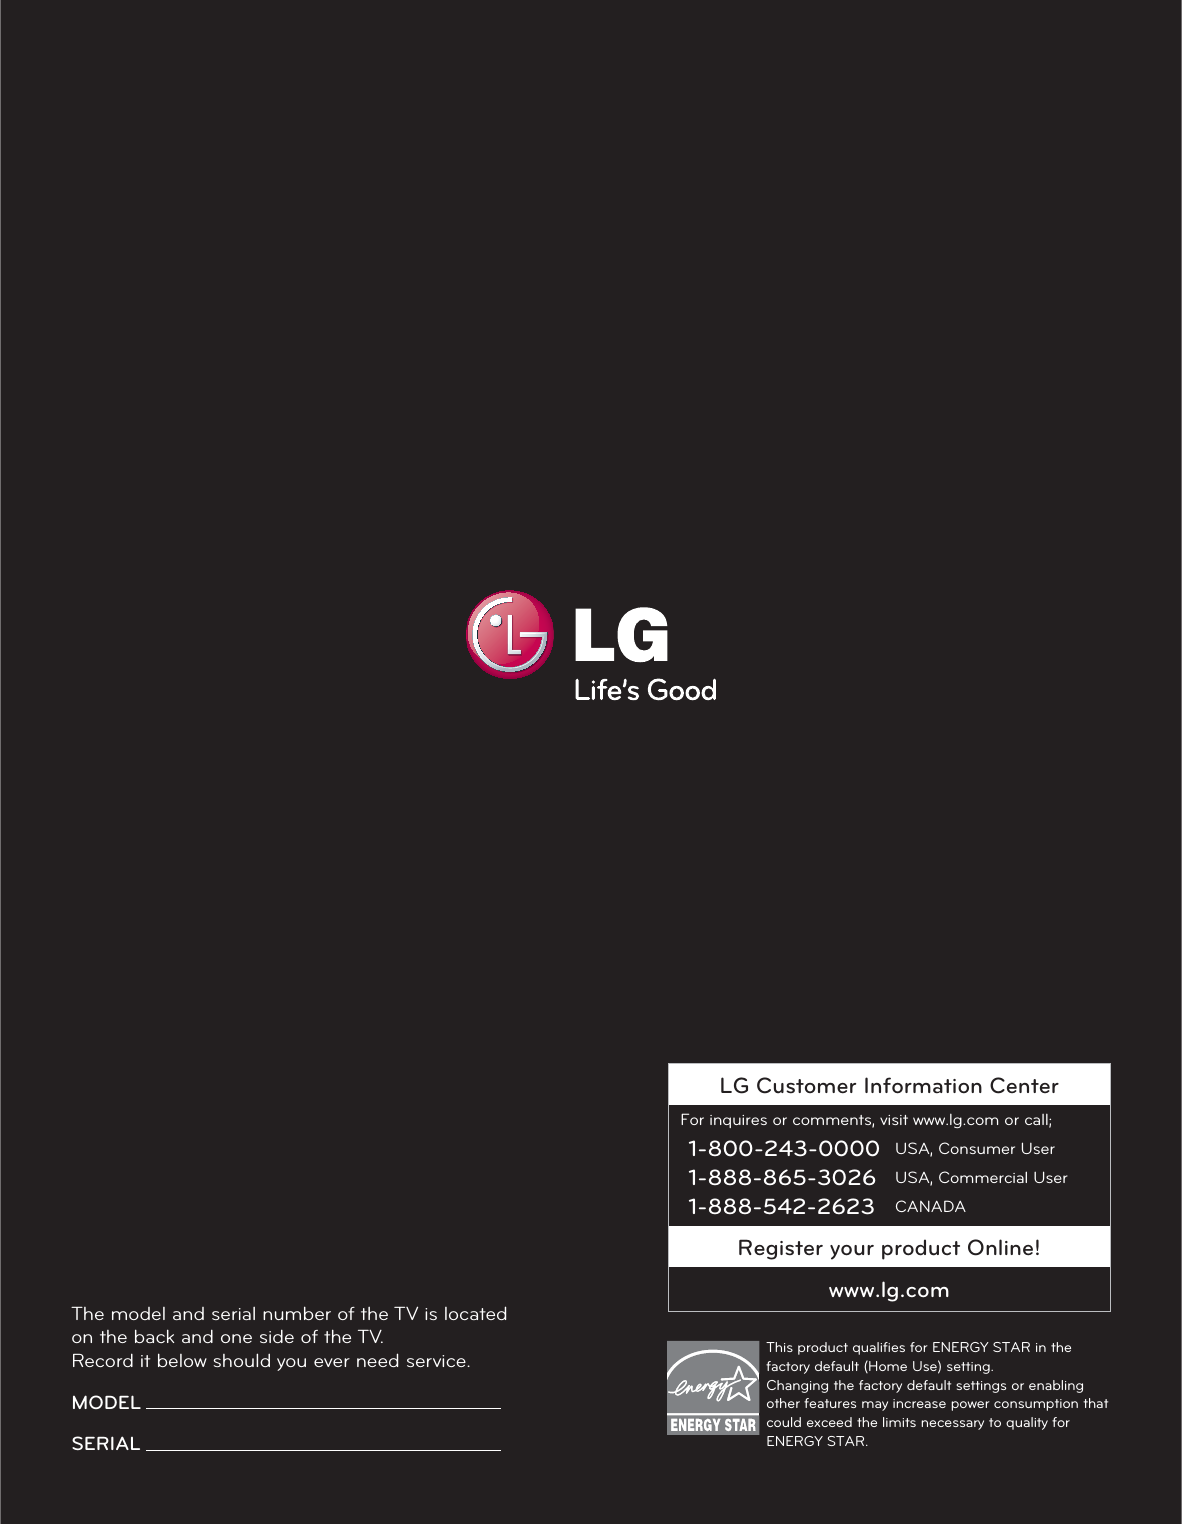 LG Customer Information CenterFor inquires or comments, visit www.lg.com or call;1-800-243-0000 USA, Consumer User1-888-865-3026 USA, Commercial User1-888-542-2623 CANADARegister your product Online!www.lg.comThe model and serial number of the TV is located on the back and one side of the TV. Record it below should you ever need service.MODEL SERIAL This product qualiﬁes for ENERGY STAR in the factory default (Home Use) setting. Changing the factory default settings or enabling other features may increase power consumption that could exceed the limits necessary to quality for ENERGY STAR.